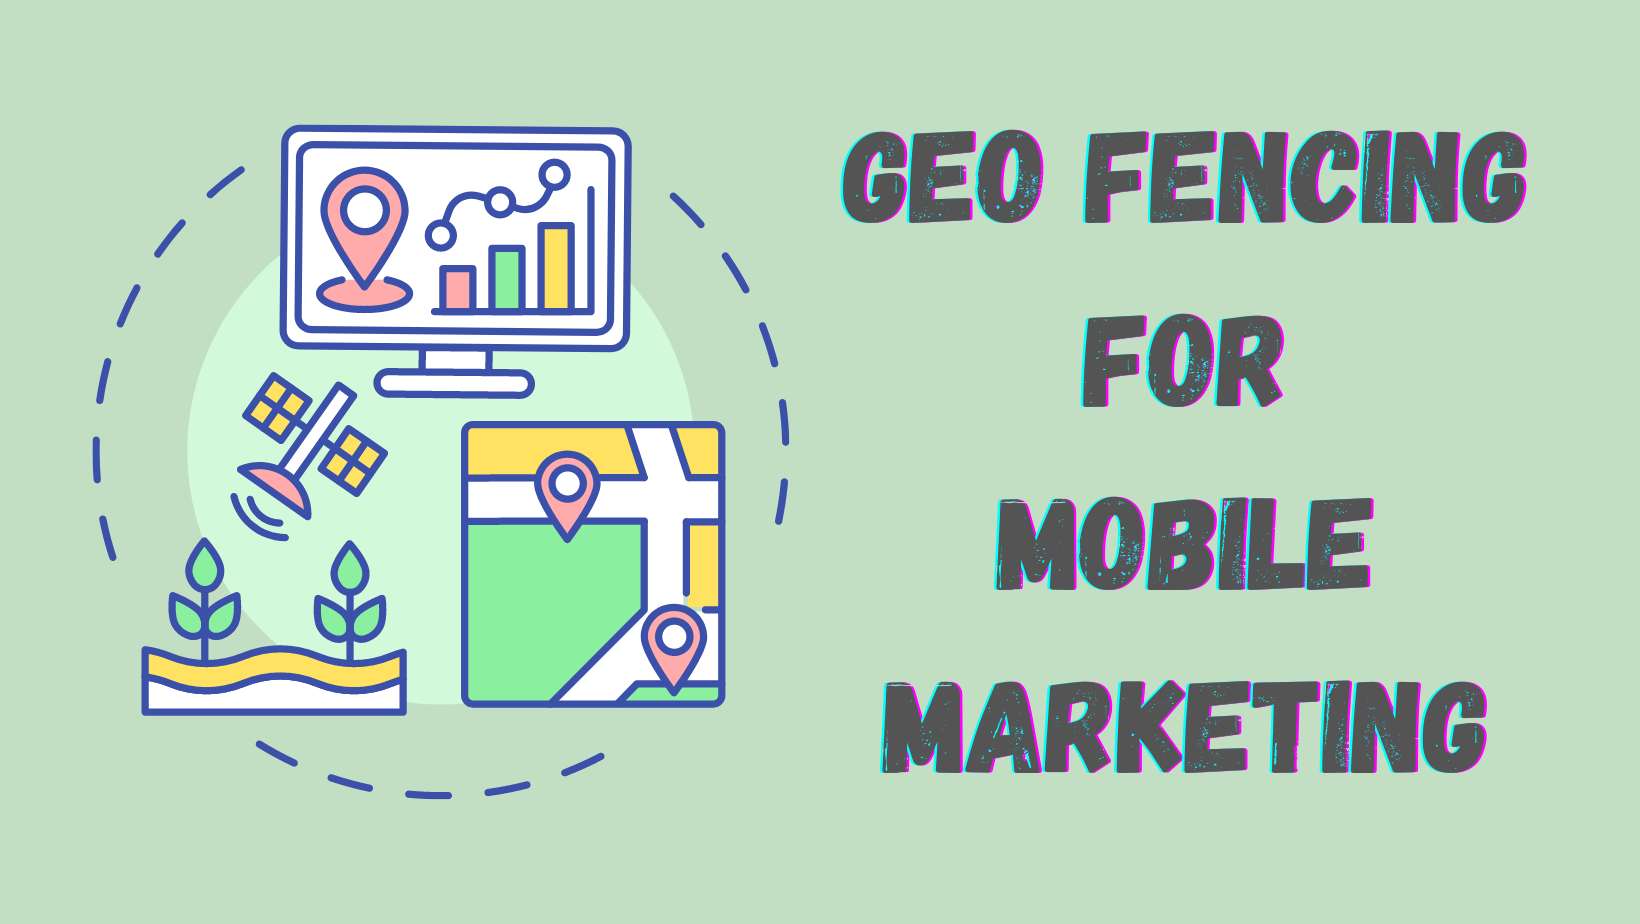 How to do mobile marketing geofencing